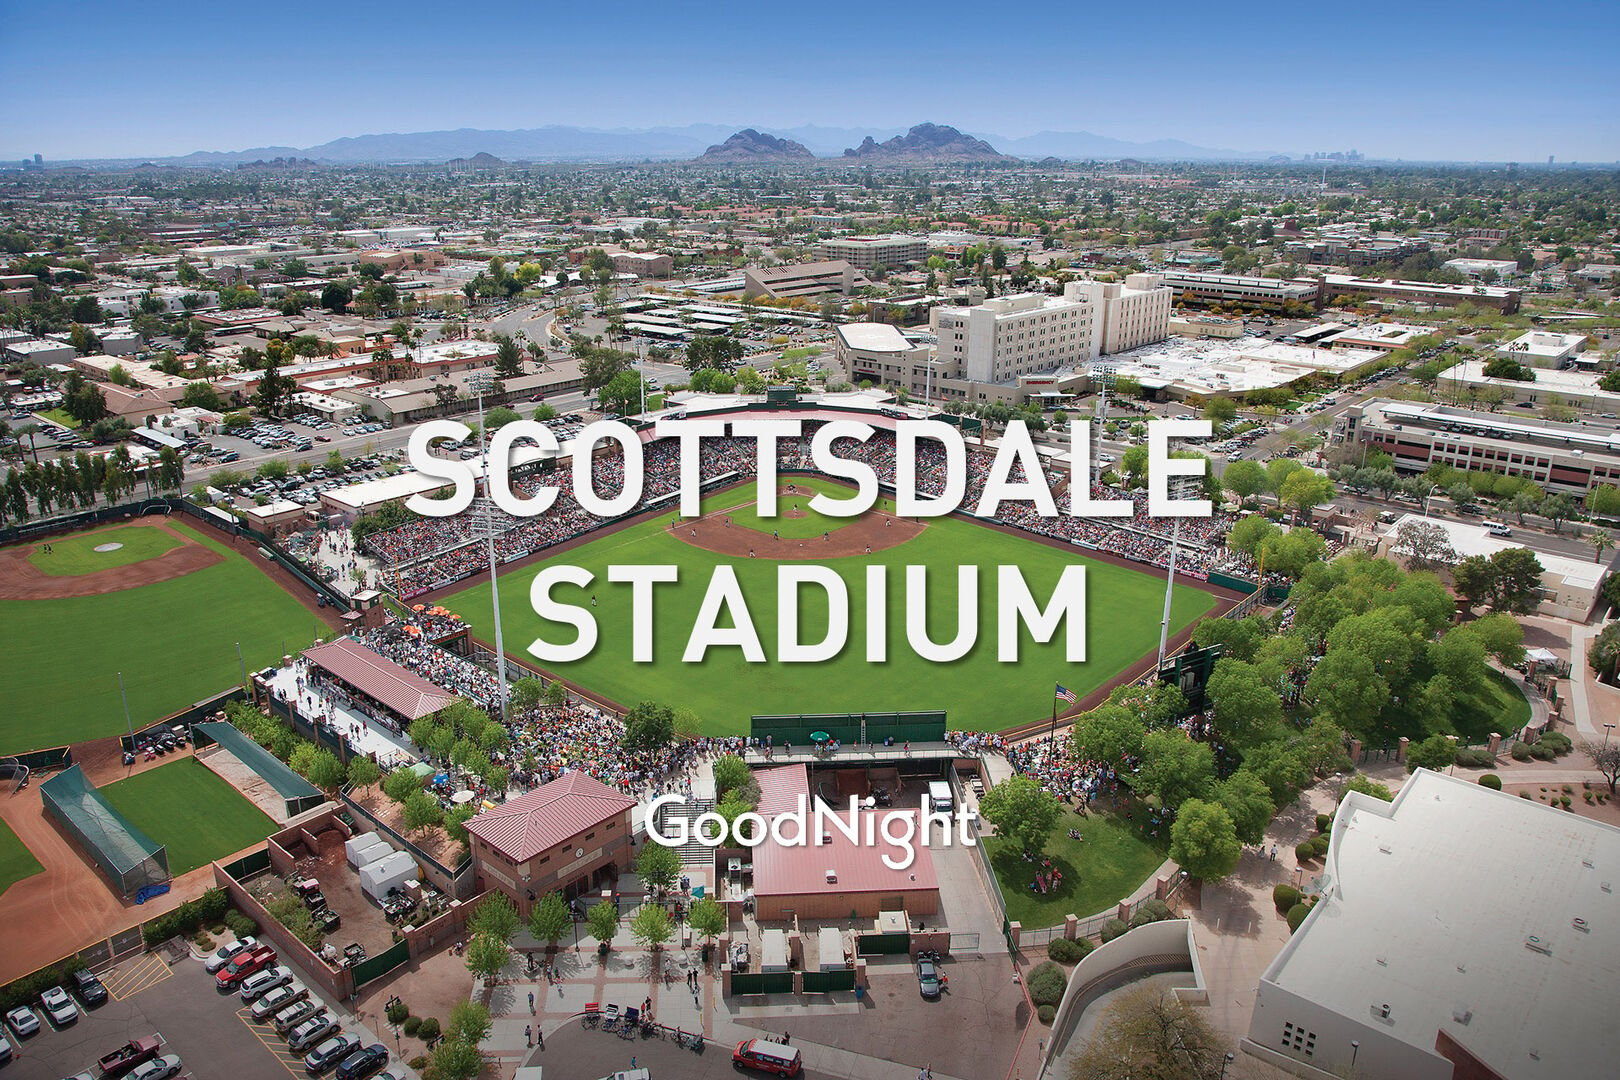 Scottsdale Stadium - Home of the San Francisco Giants during Spring Training 2023: 2 mins